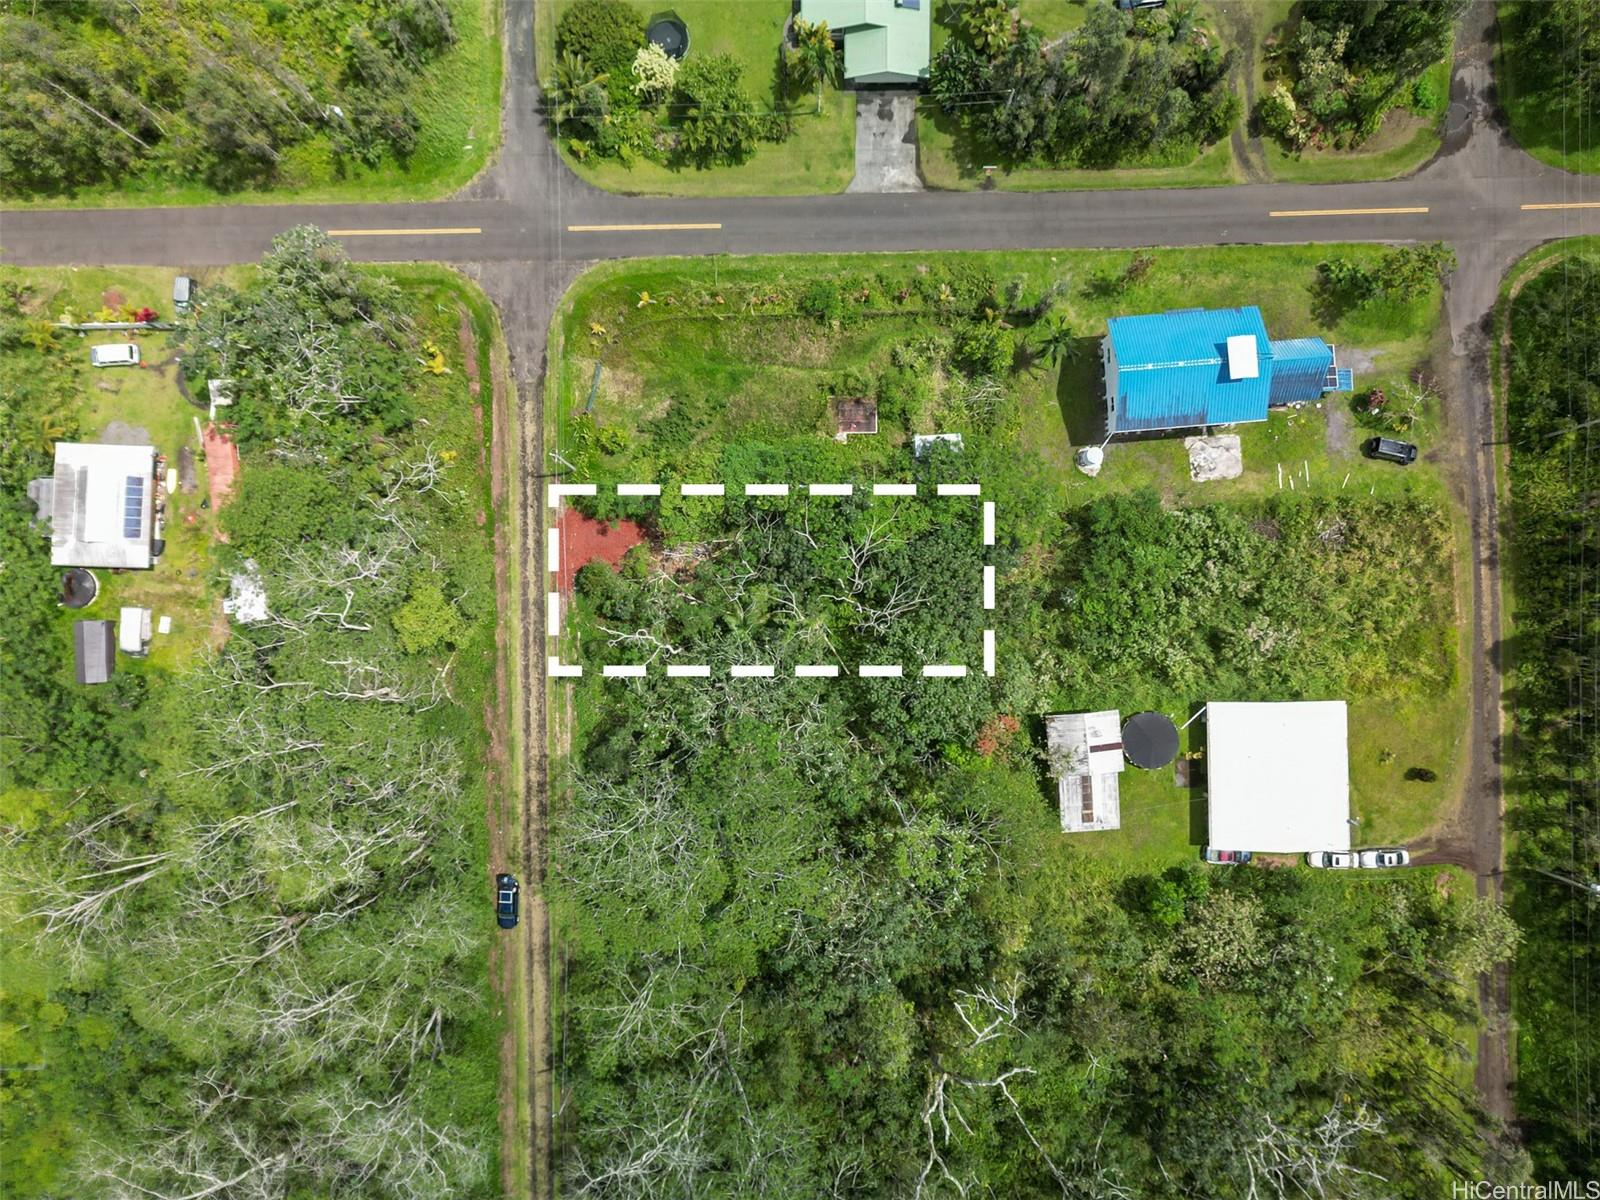 an aerial view of a house with a yard and plants